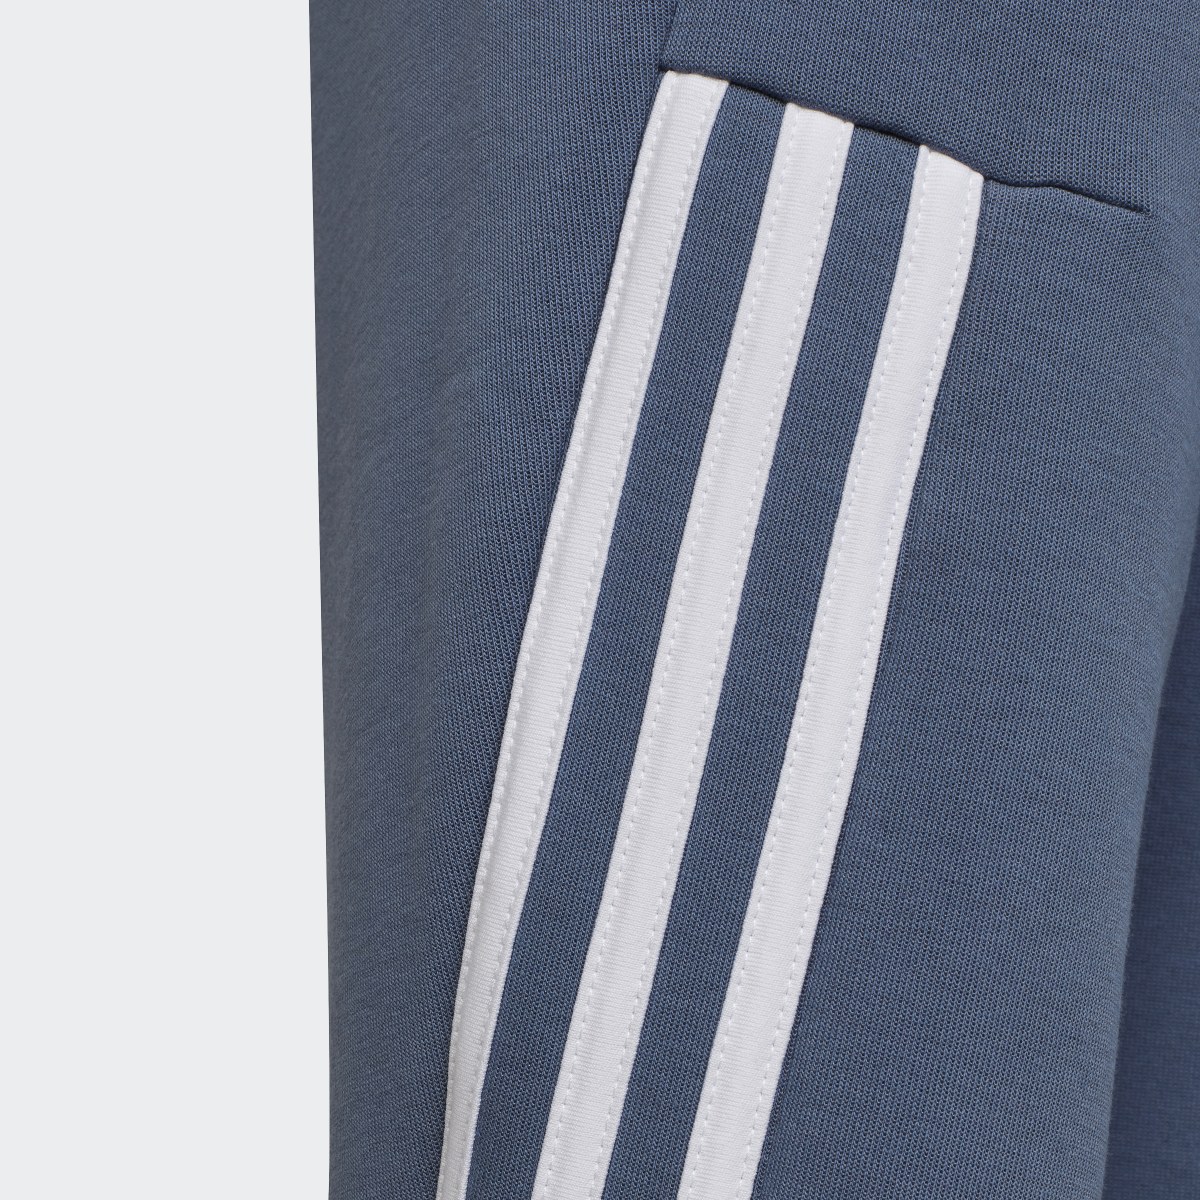 Adidas Future Icons 3-Stripes Tapered-Leg Tracksuit Bottoms. 5